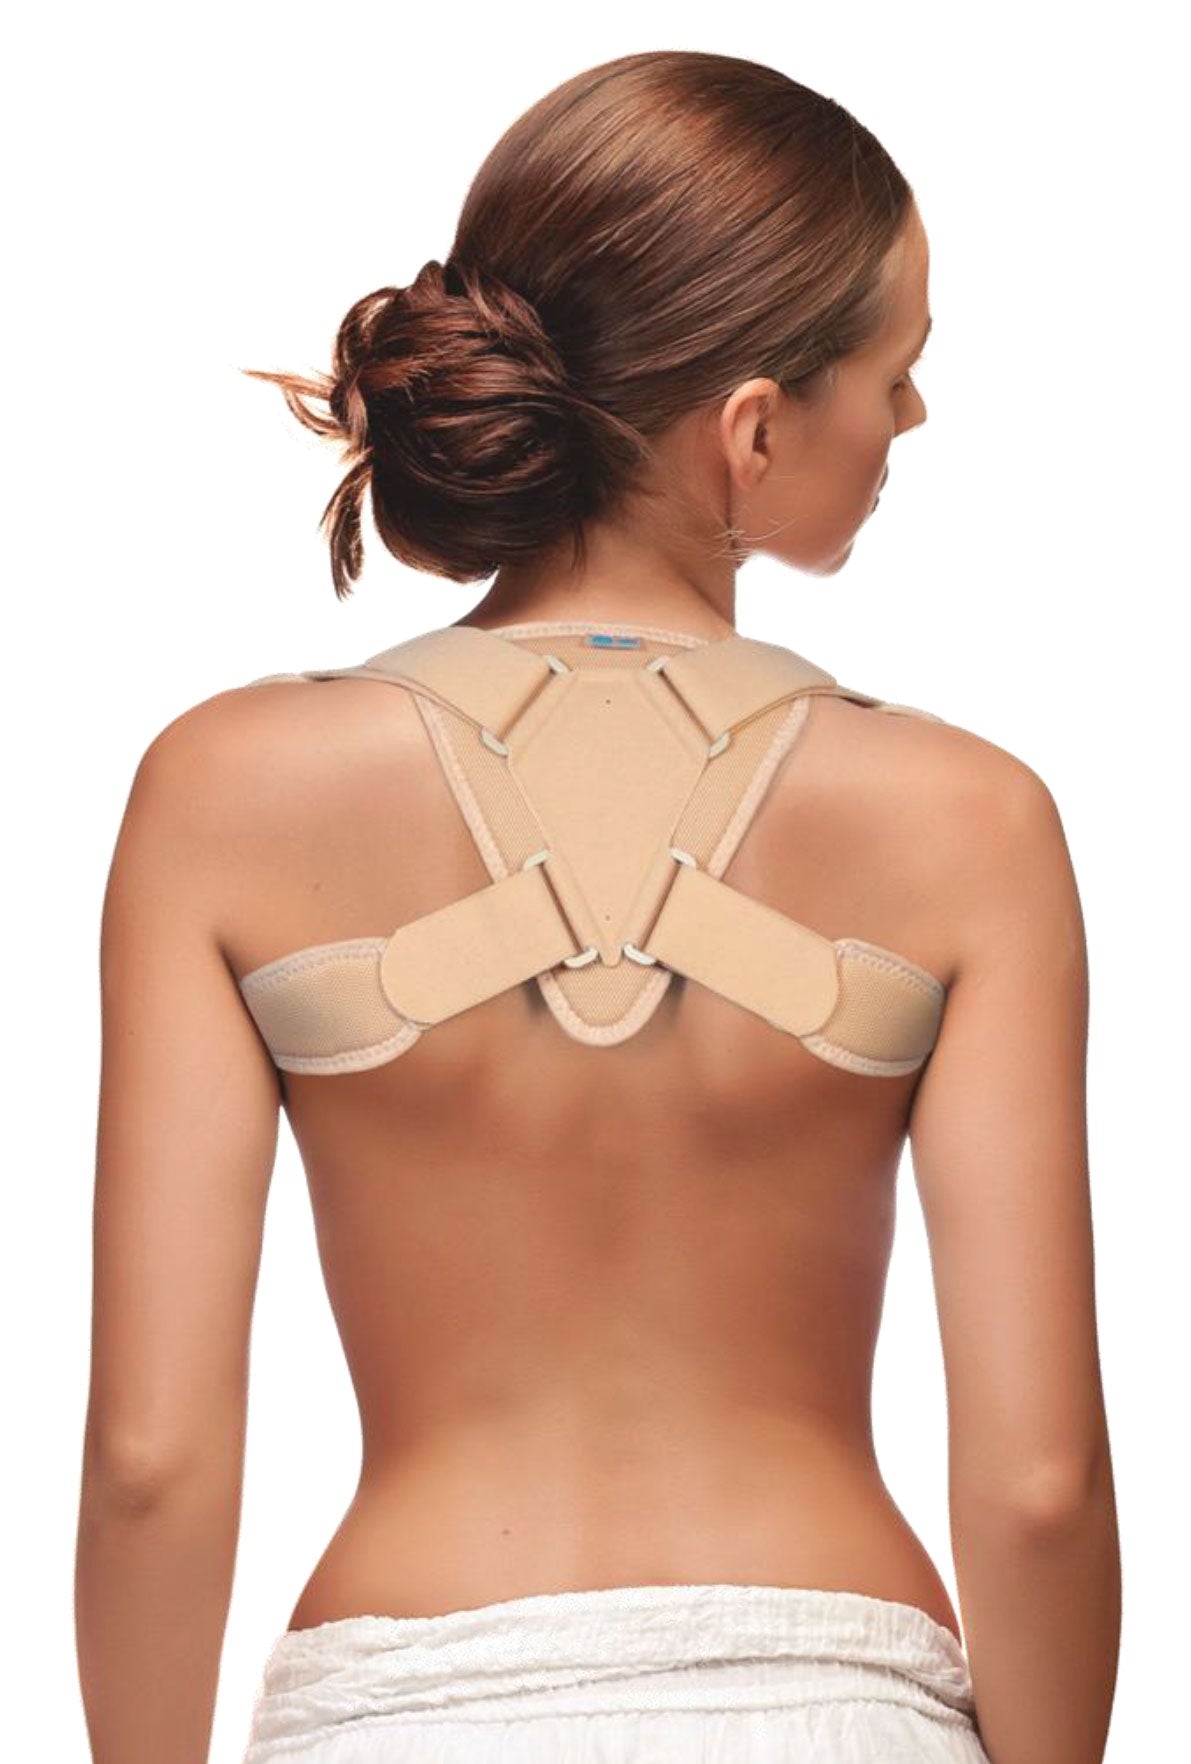 Clavi + Clavicle Immobilising-Repositioning Brace